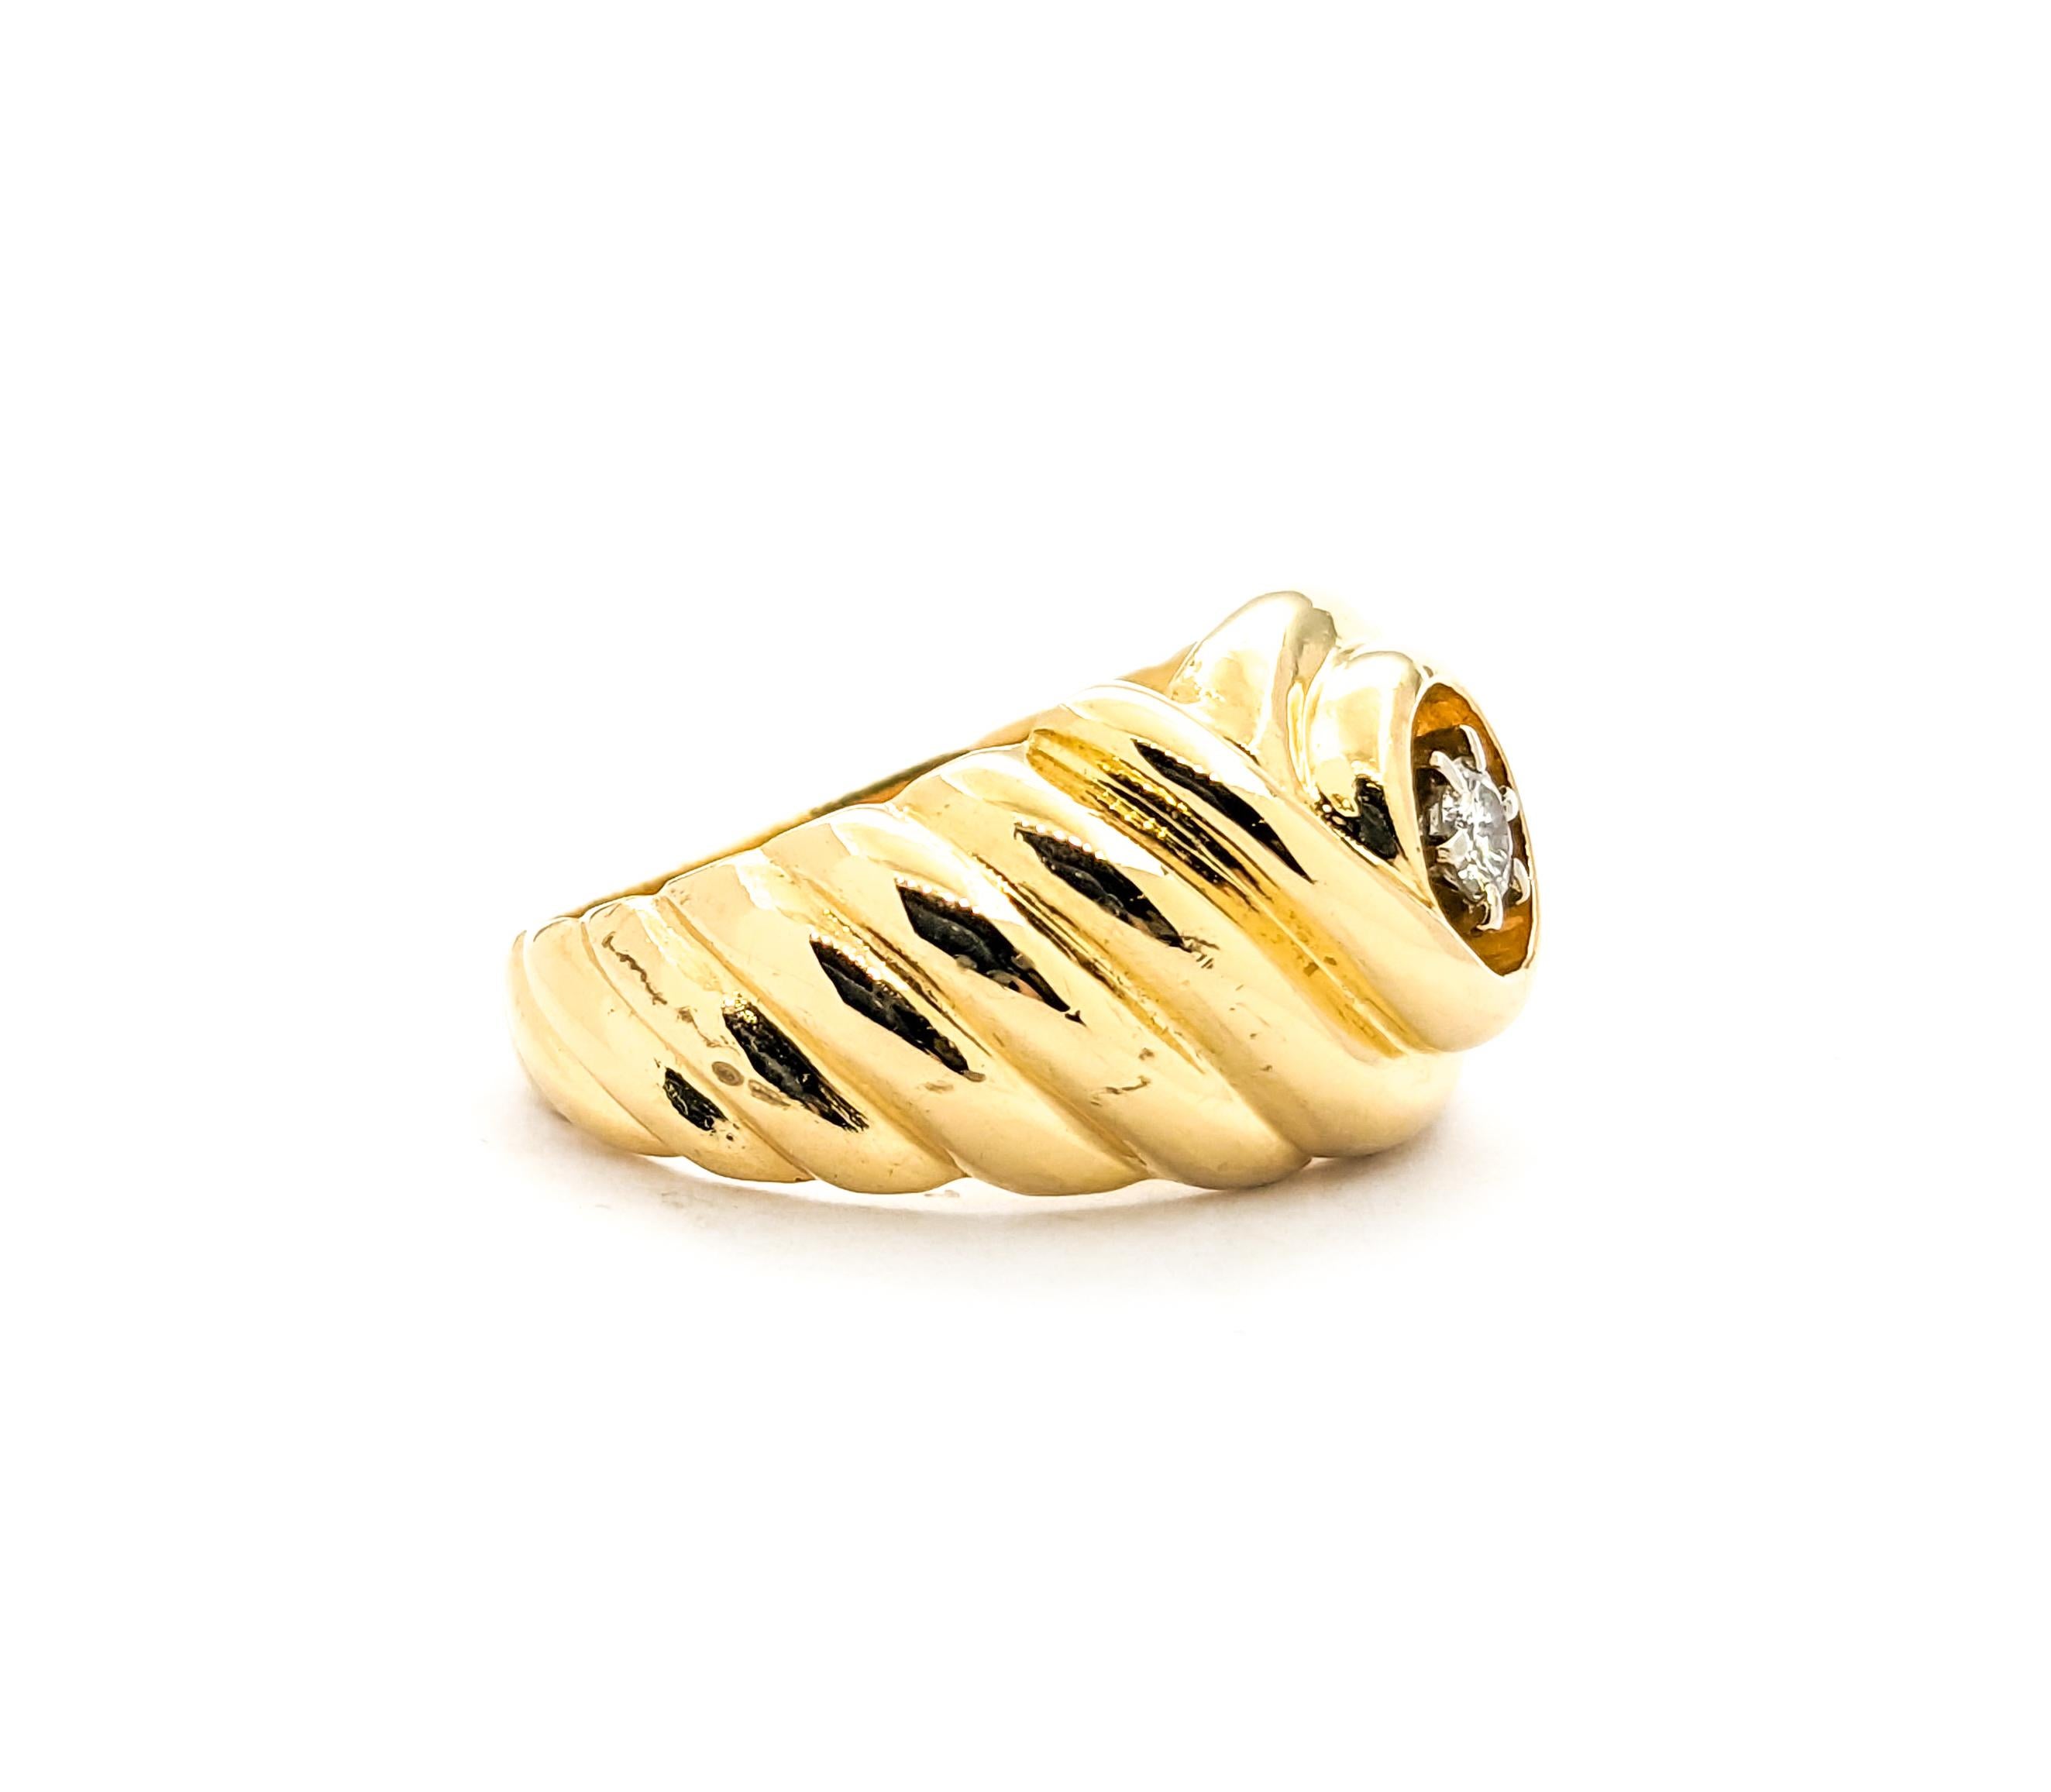 5ct Diamond Swirl Design Ring In Yellow Gold For Sale 5